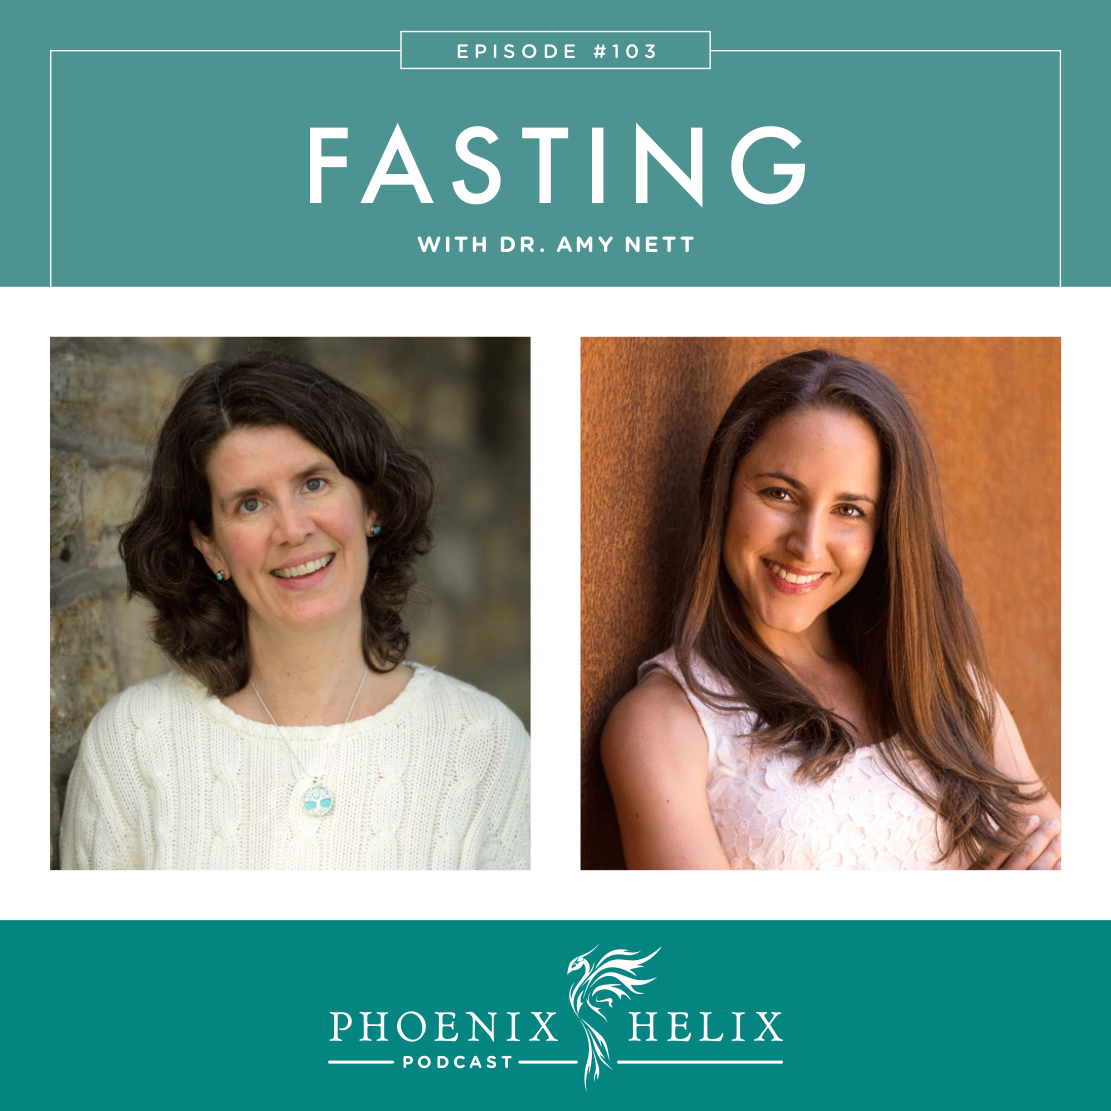 Fasting with Dr. Amy Nett | Phoenix Helix Podcast